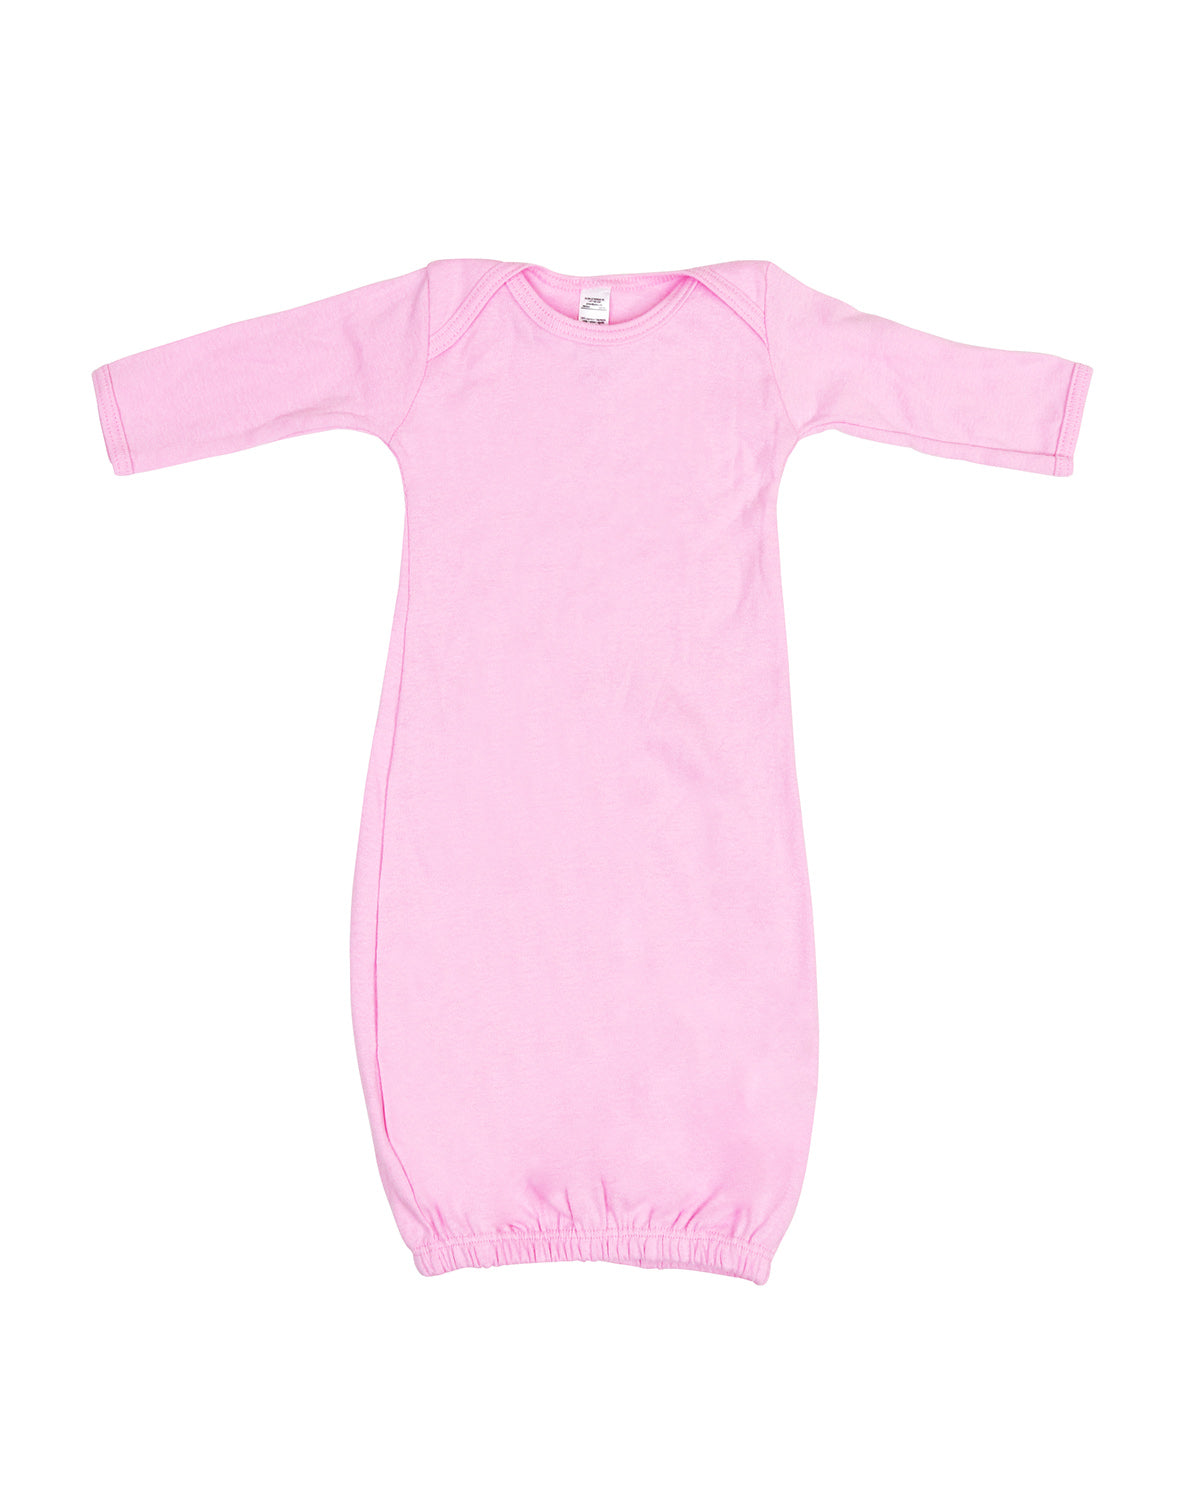 NEW Infant Gowns, 0-6 months, Overstock